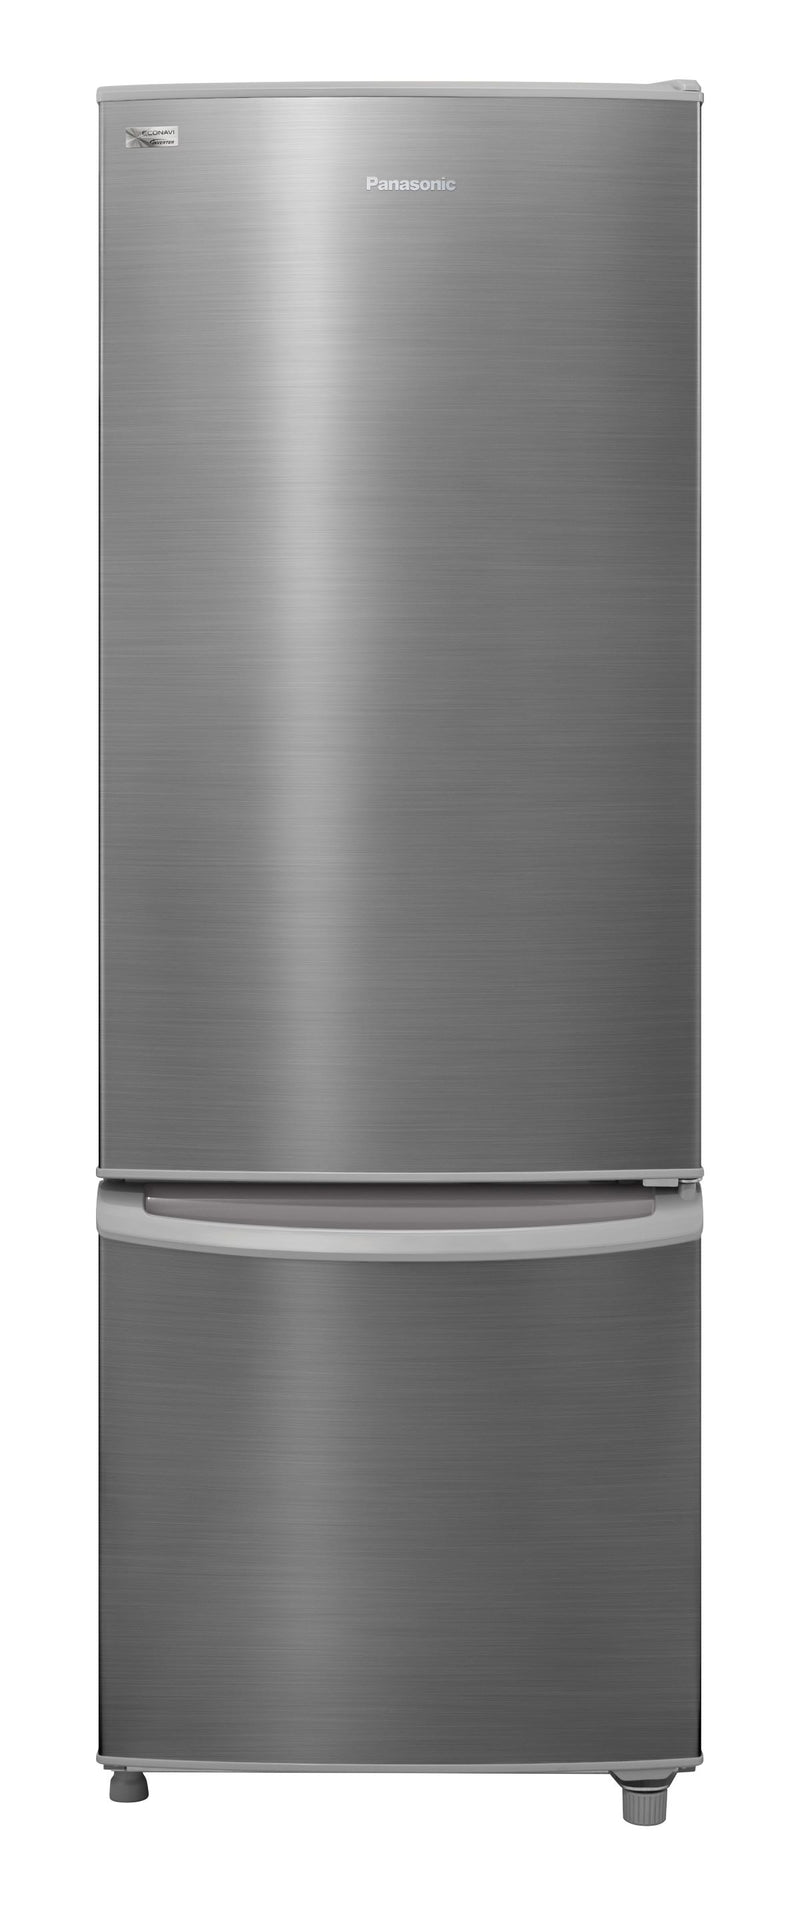 PANASONIC NRBT269PS ECONAVI Refrigerator(Stainless Steel Color) (includes unpacking and moving appliance service)